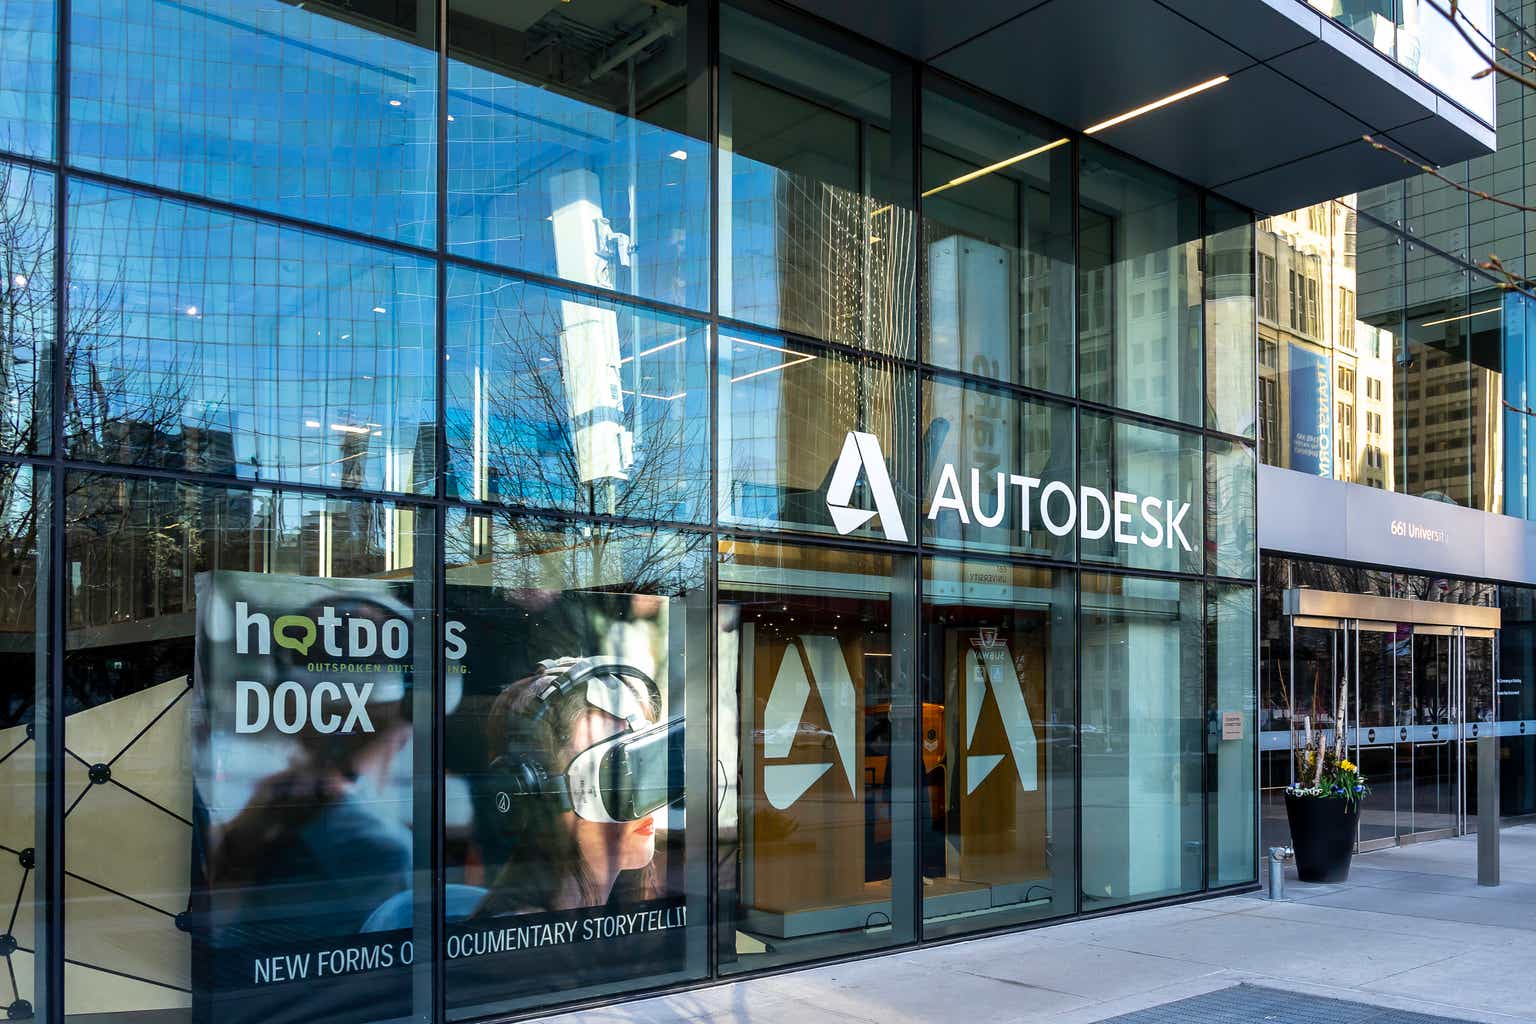 Autodesk: Sustainable Growth And Profound AI Opportunities At A Price